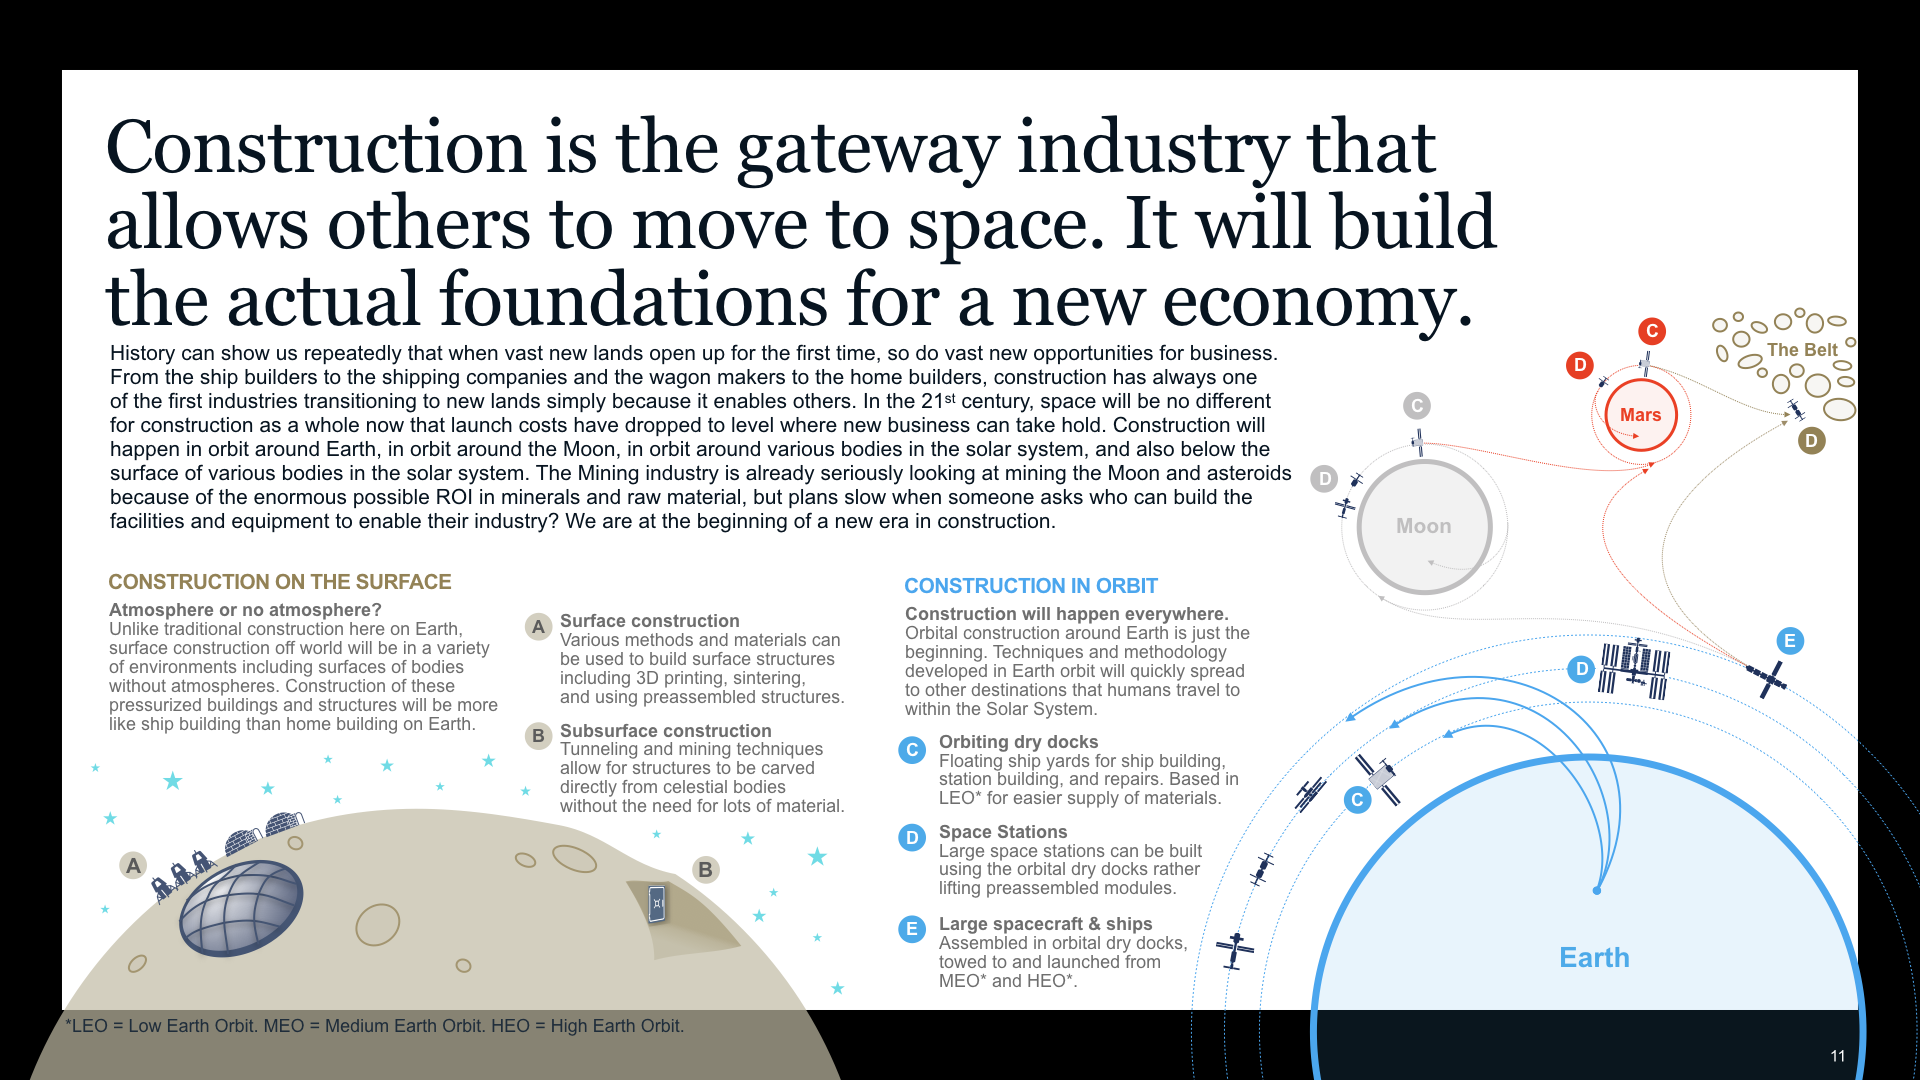 McKinsey_SpaceEconomy2019_CONSTRUCTION_overview_v12.011.png